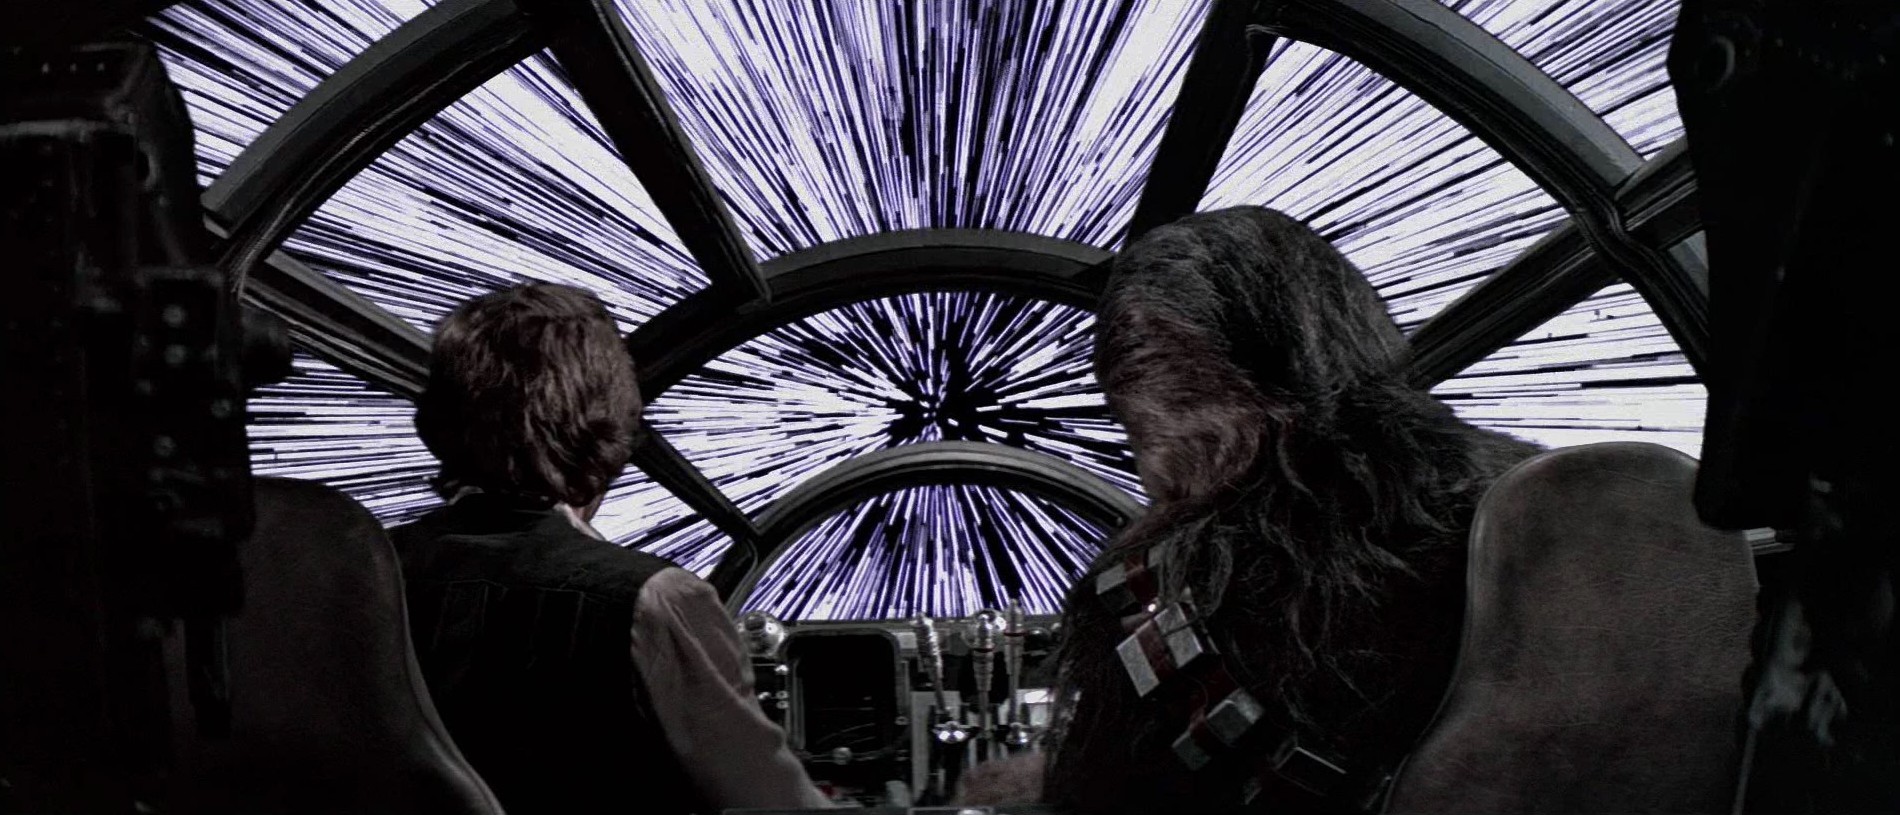 As She Enters Hyperspace From Star Wars Episode Iv A New Hope